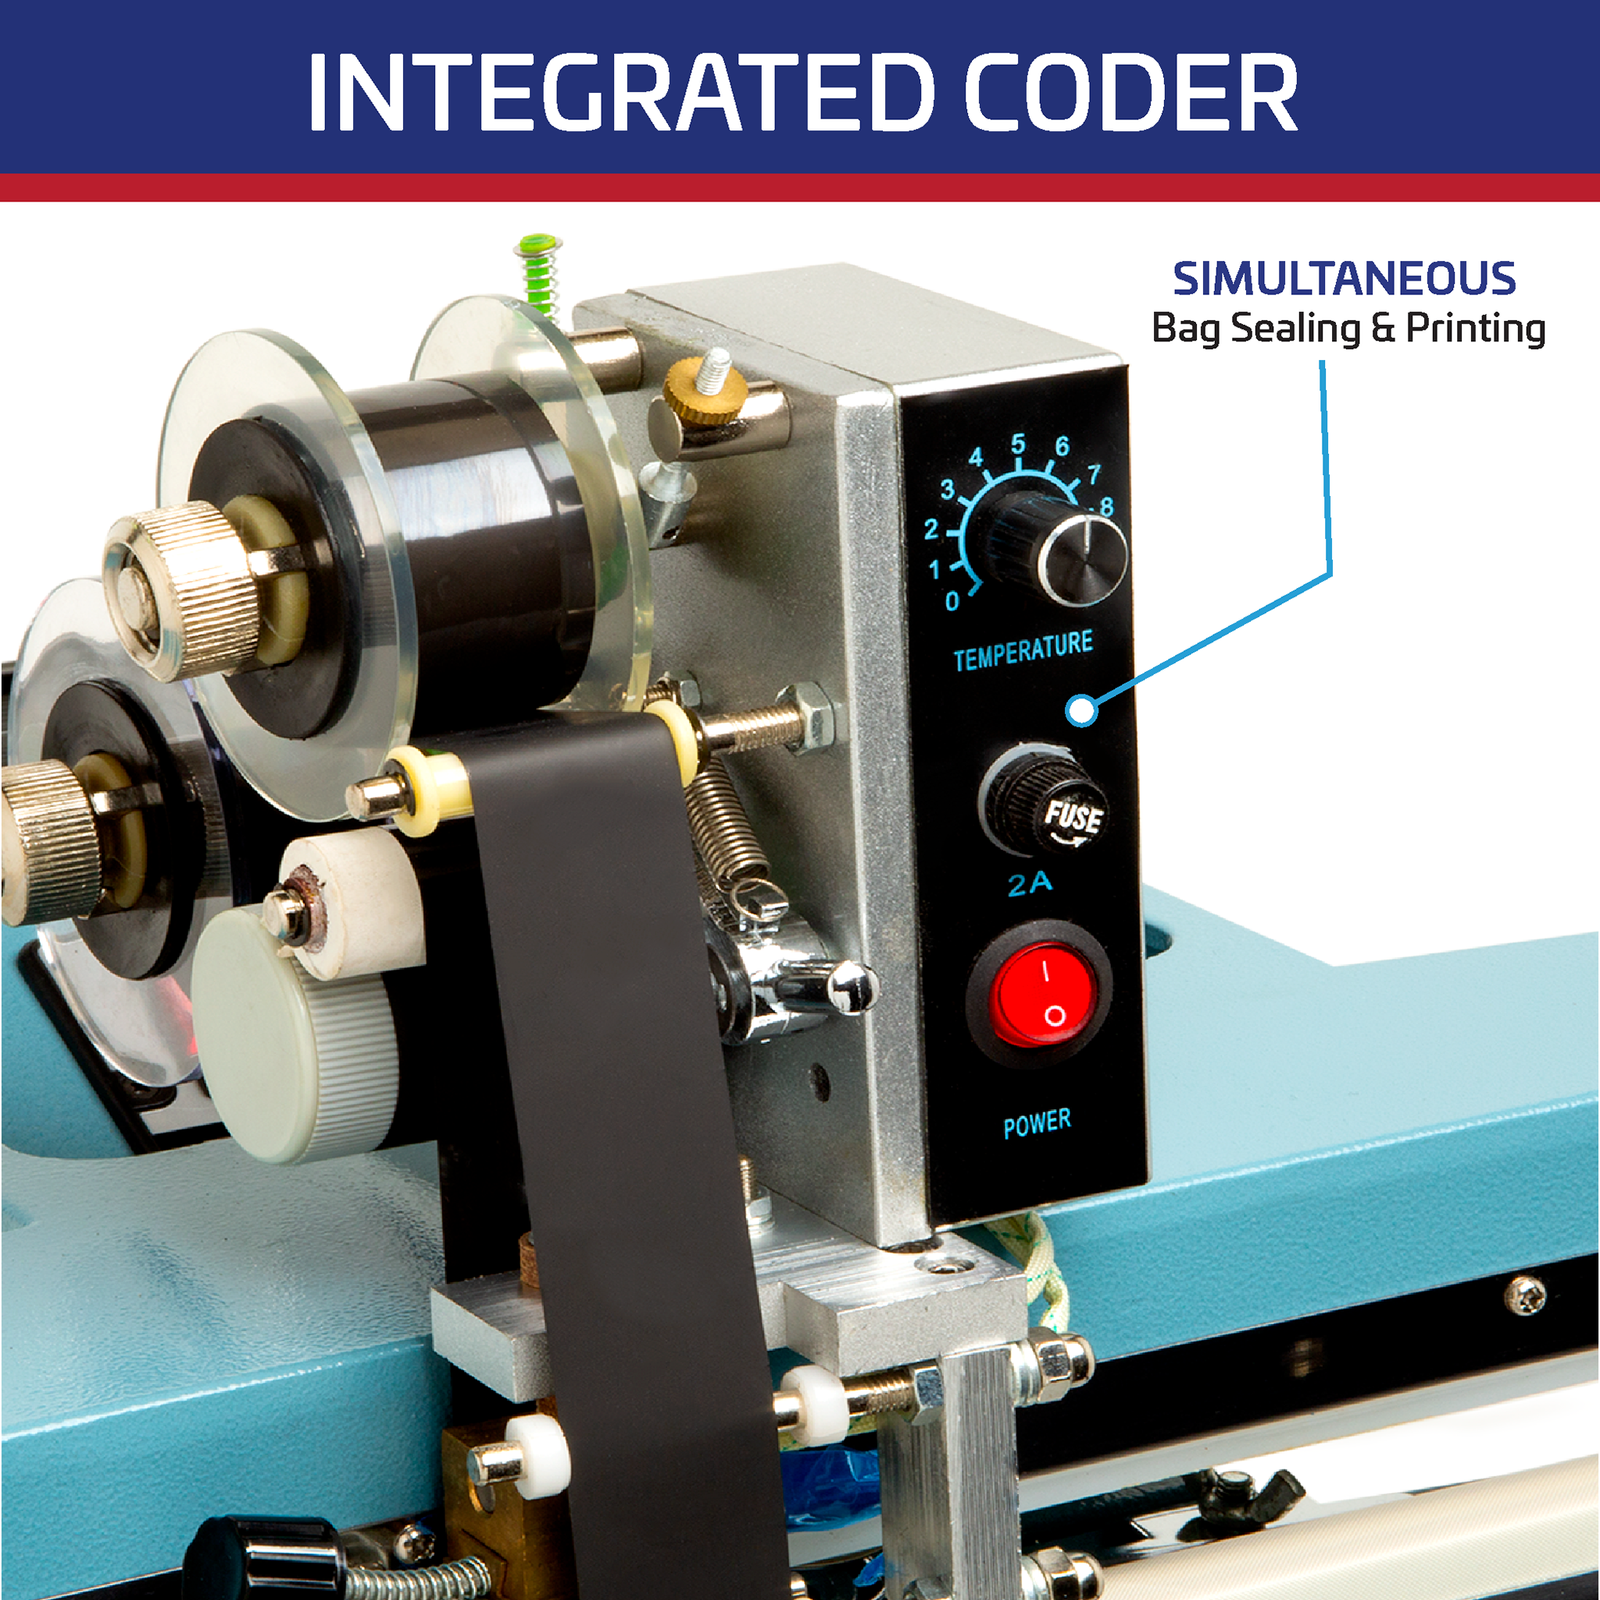 Title reads: “Integrated Coder” shows a close up of the hot stamp printer and a text highlighting the machine’s simultaneous bag sealing and printing capabilities.